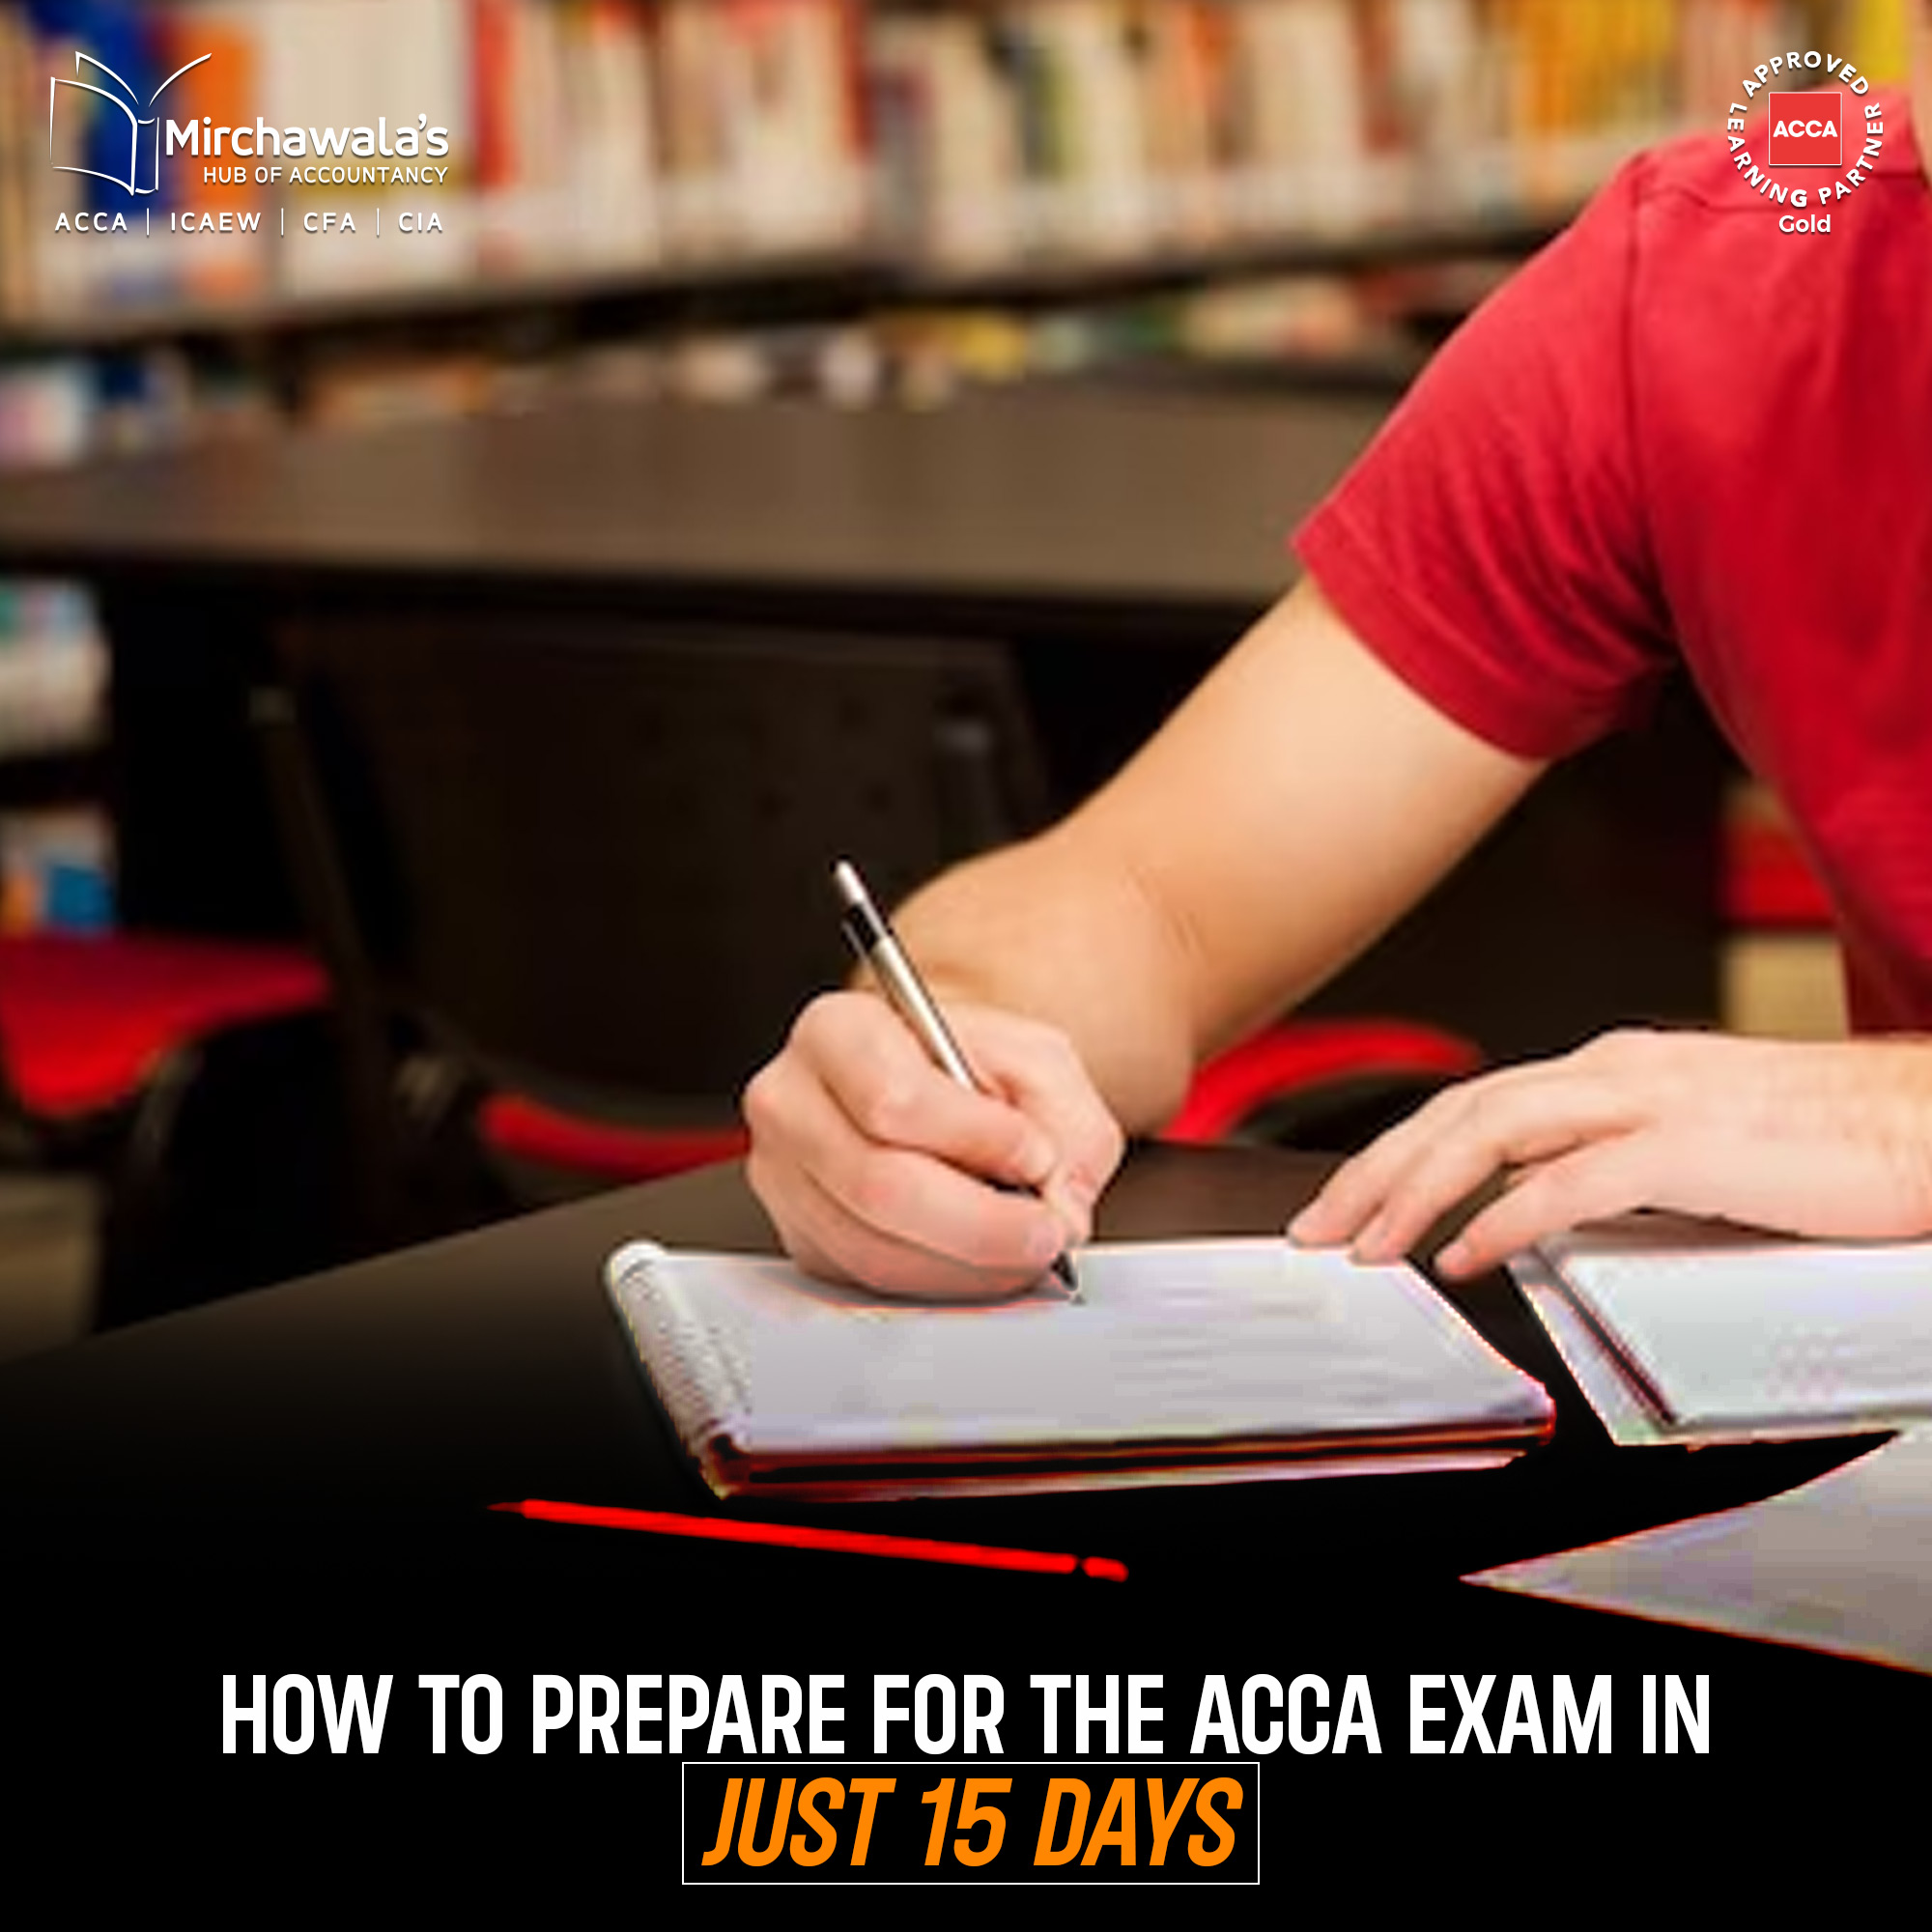 How to Prepare for the ACCA Exam in Just 15 Days